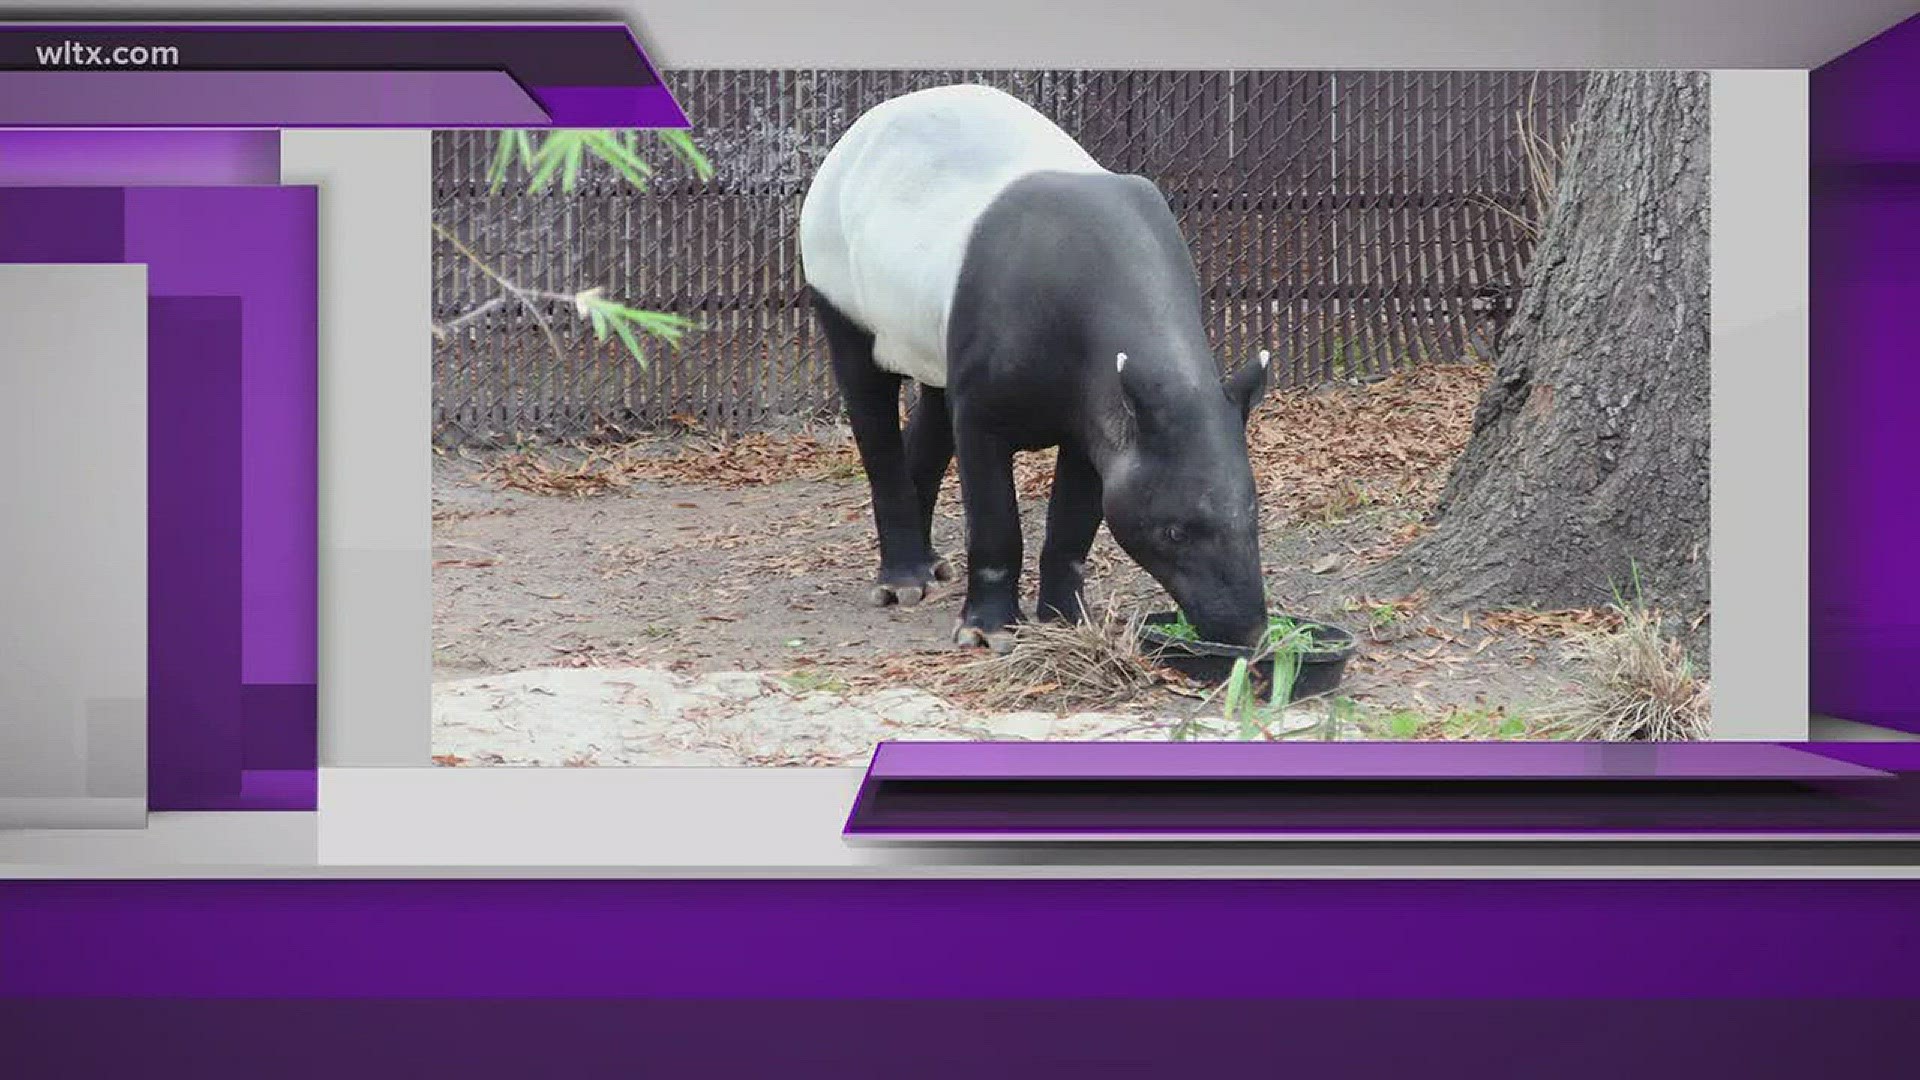 Pulau, a 21-year-old tapir, has come all the way from Ellen Trout Zoo in Lufkin, Texas, to meet his new companion, 21-year-old Daniella.